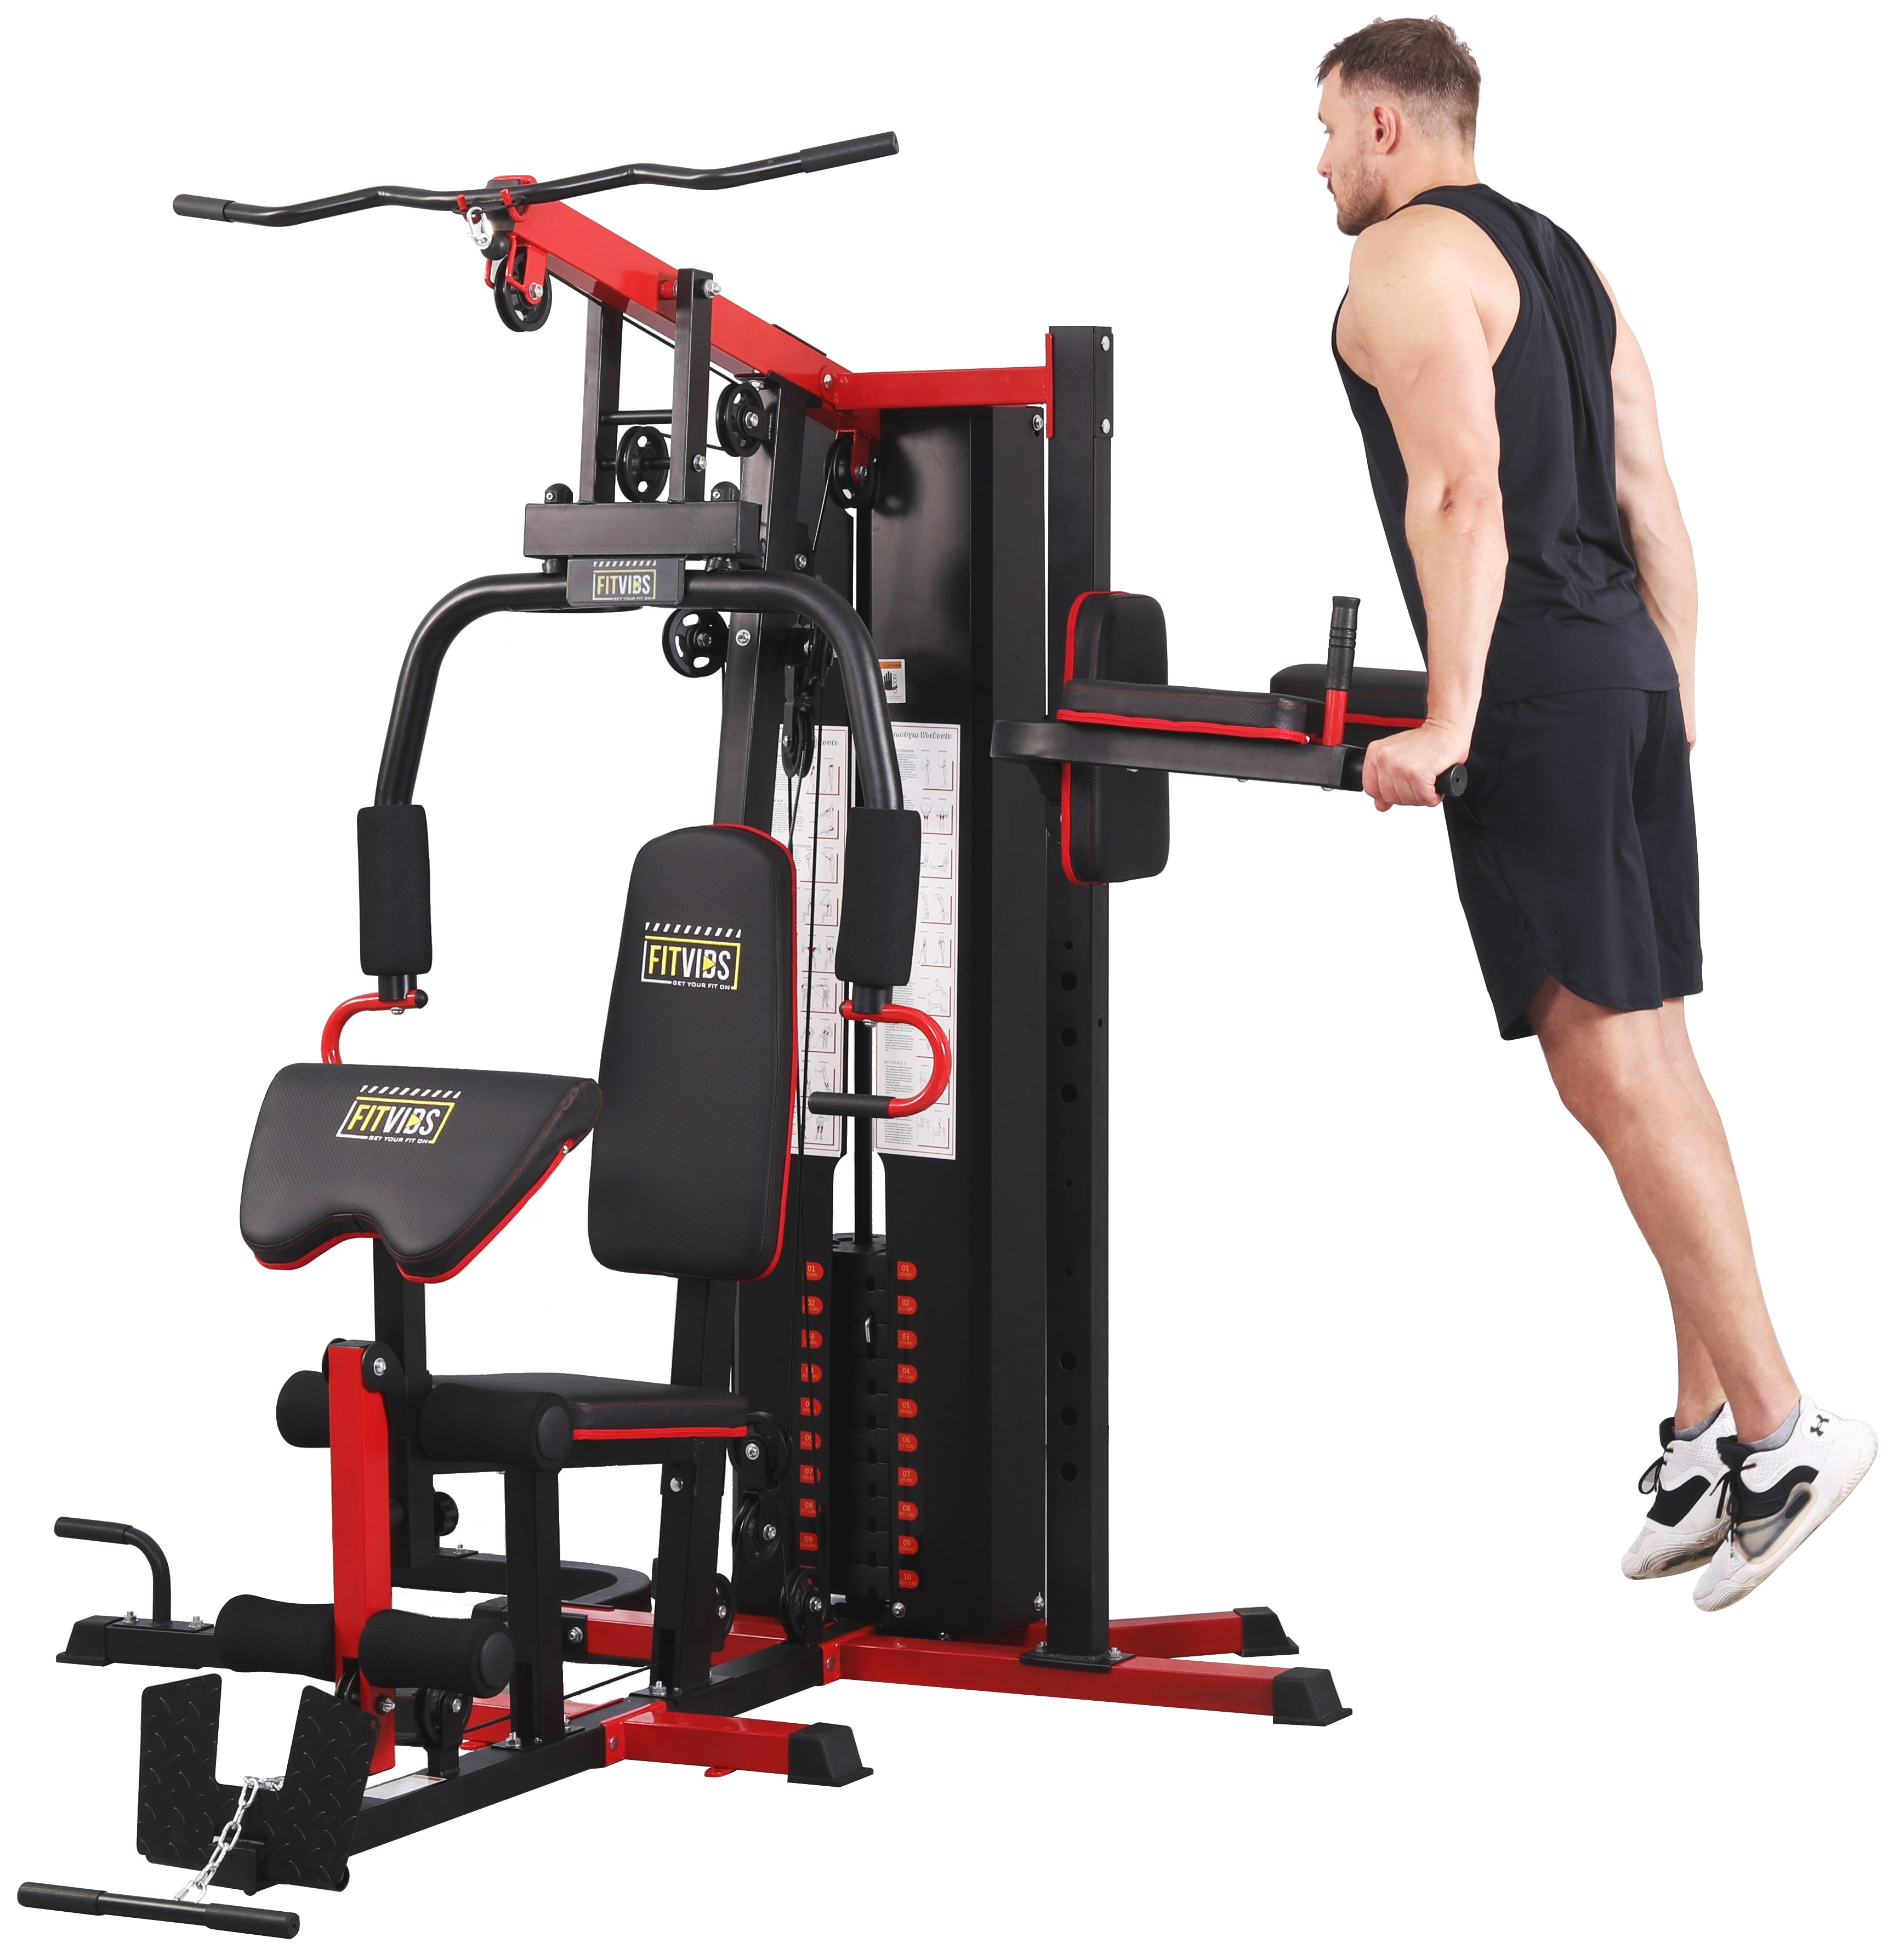 Fitvids LX750 Home Gym System Workout Station with 330 Lbs of